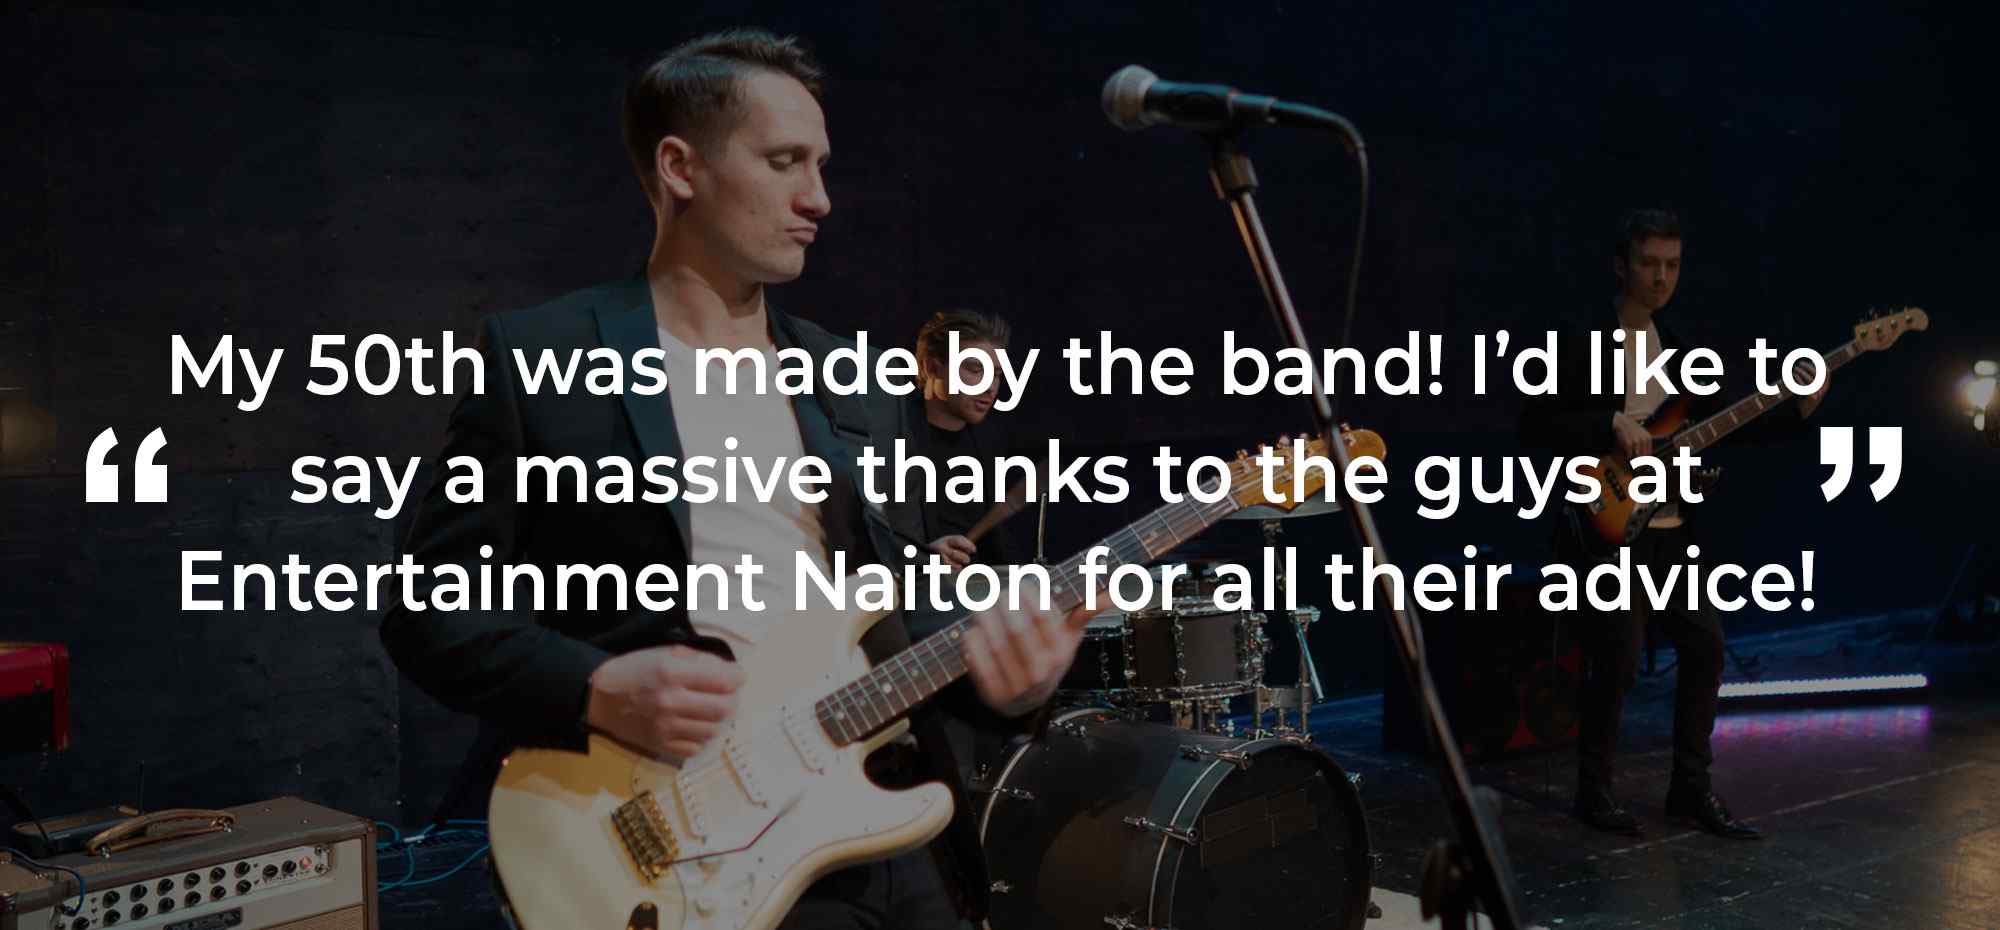 Client Review of Party Band UK